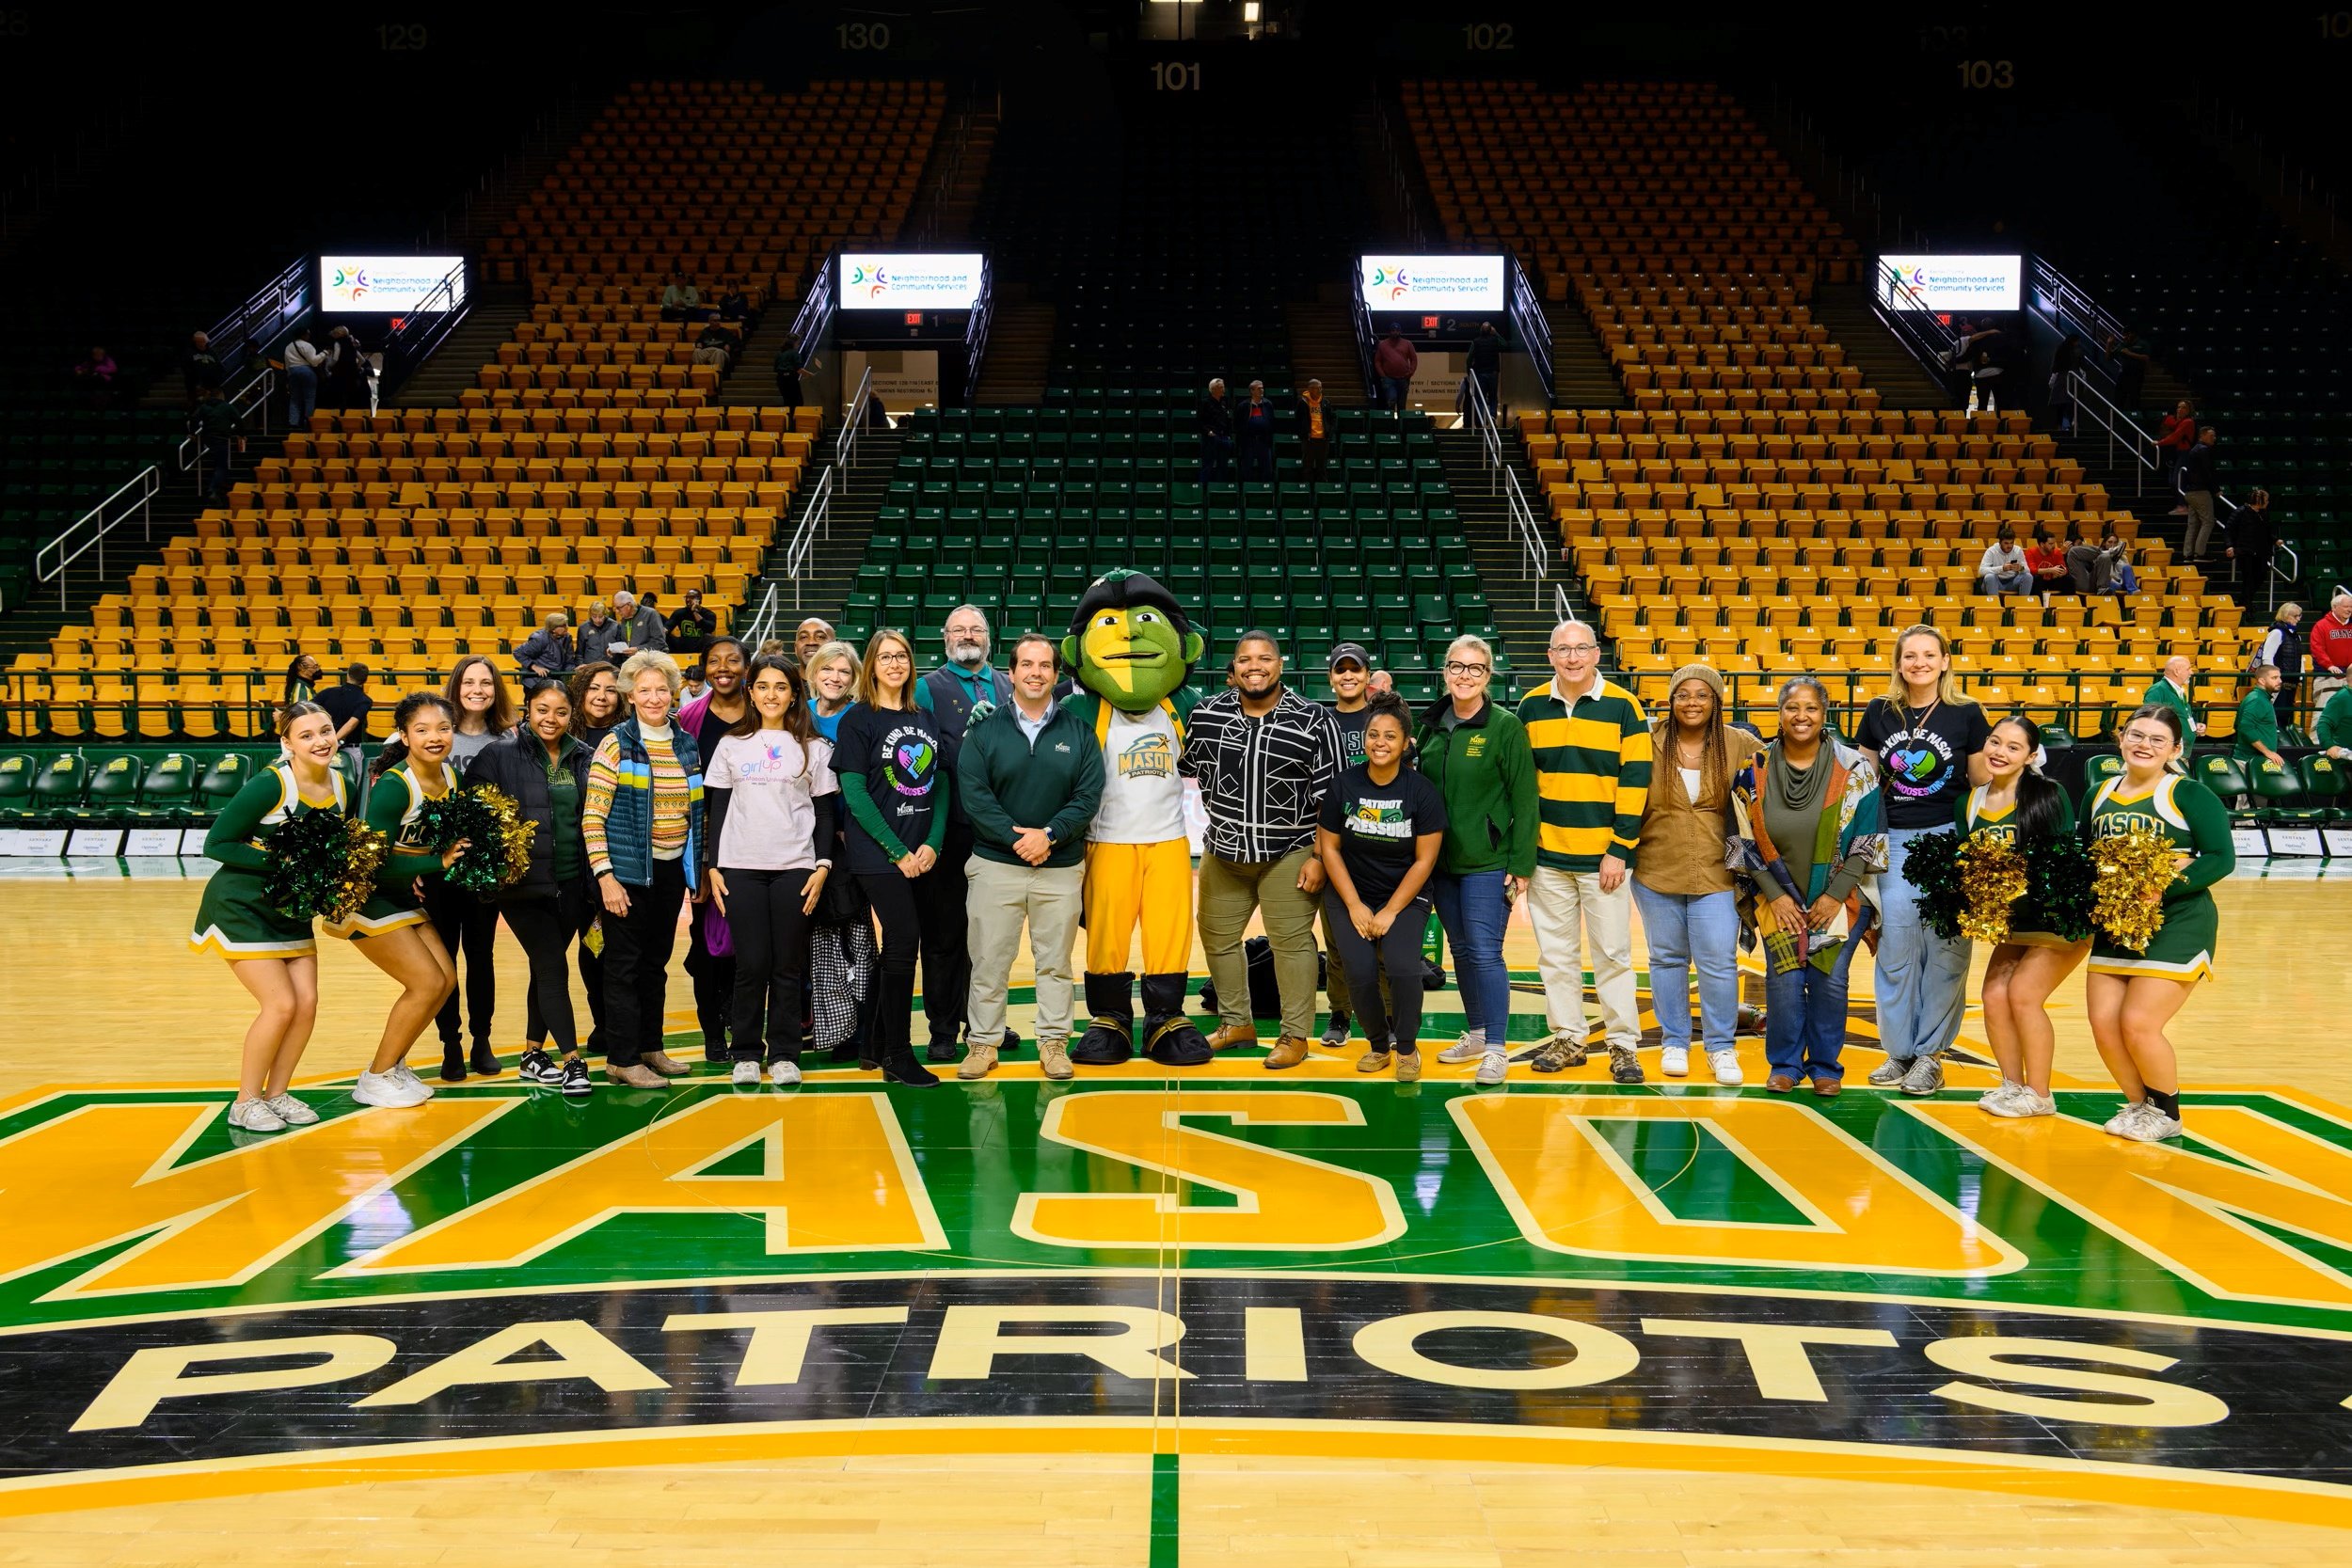 A group of George Mason University kindness ambassadors, students and cheerleaders pose with the mascot for a photo in the basketball arena